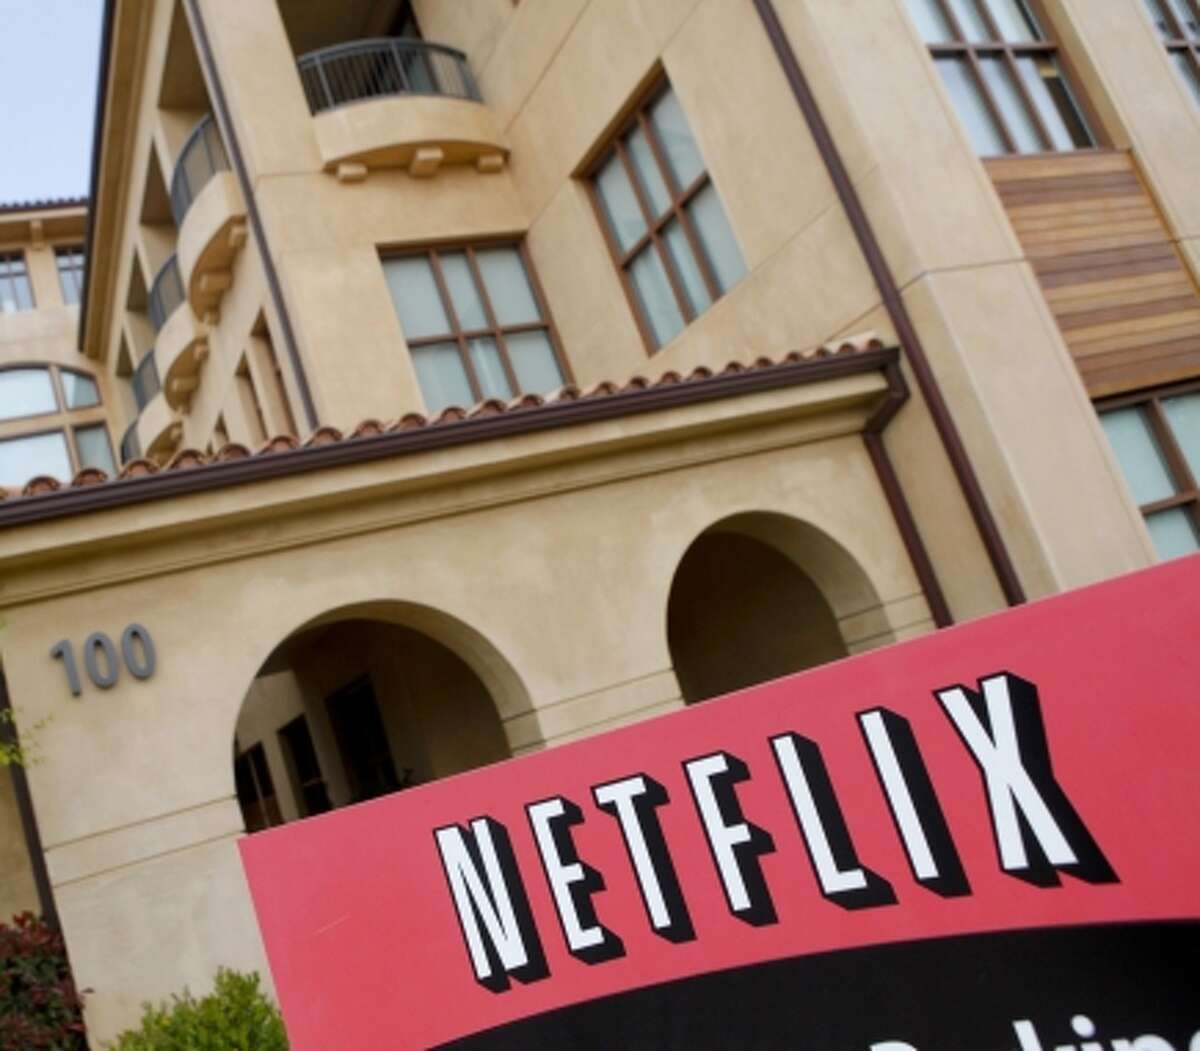 Netflix says that Michael Kail, a former executive, received illegal commissions from firms whose invoices he approved.